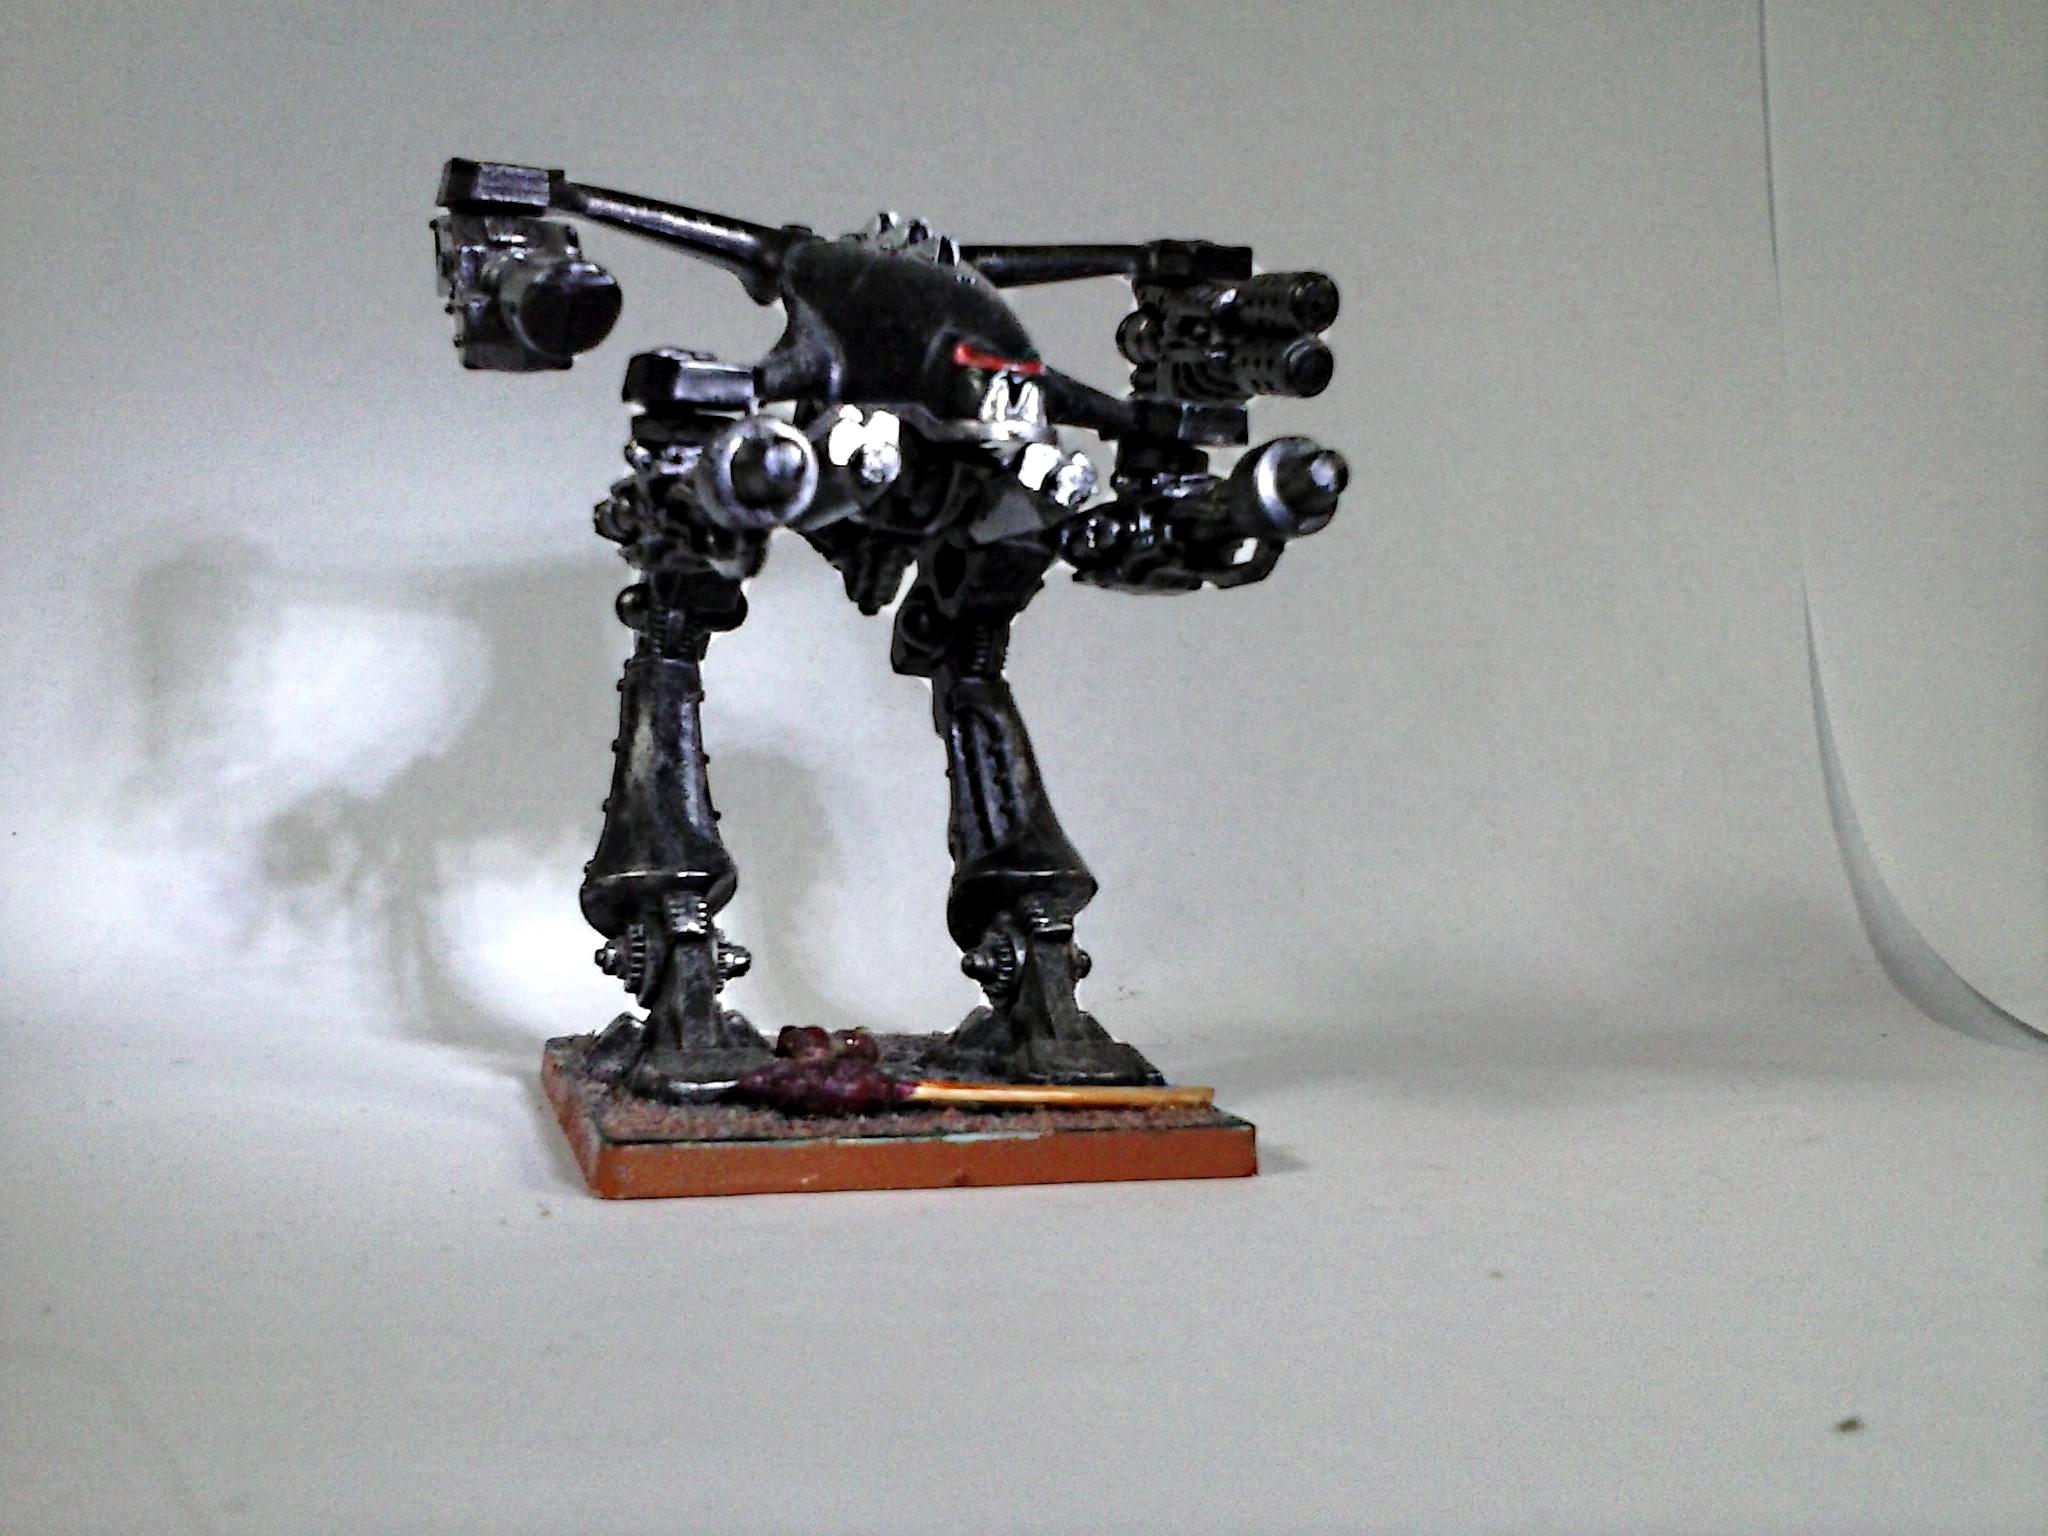 Artillery, Assault Cannon, Basilisk, Black, Blast Master, Chaos, Conversion, Crusade, Doom Siren, Earthshaker, Havocs, Heavy Bolter, Lascannon, Legion, Leman Russ, Lightening Claws, Looted, Missile Launcher, Noise, Pirate, Pirates, Plasma Cannon, Punisher, Silver, Sonic Blaster, Space, Space Marines, Spiky, Stolen., Talons, Tank, Warband, Warp, Weathered